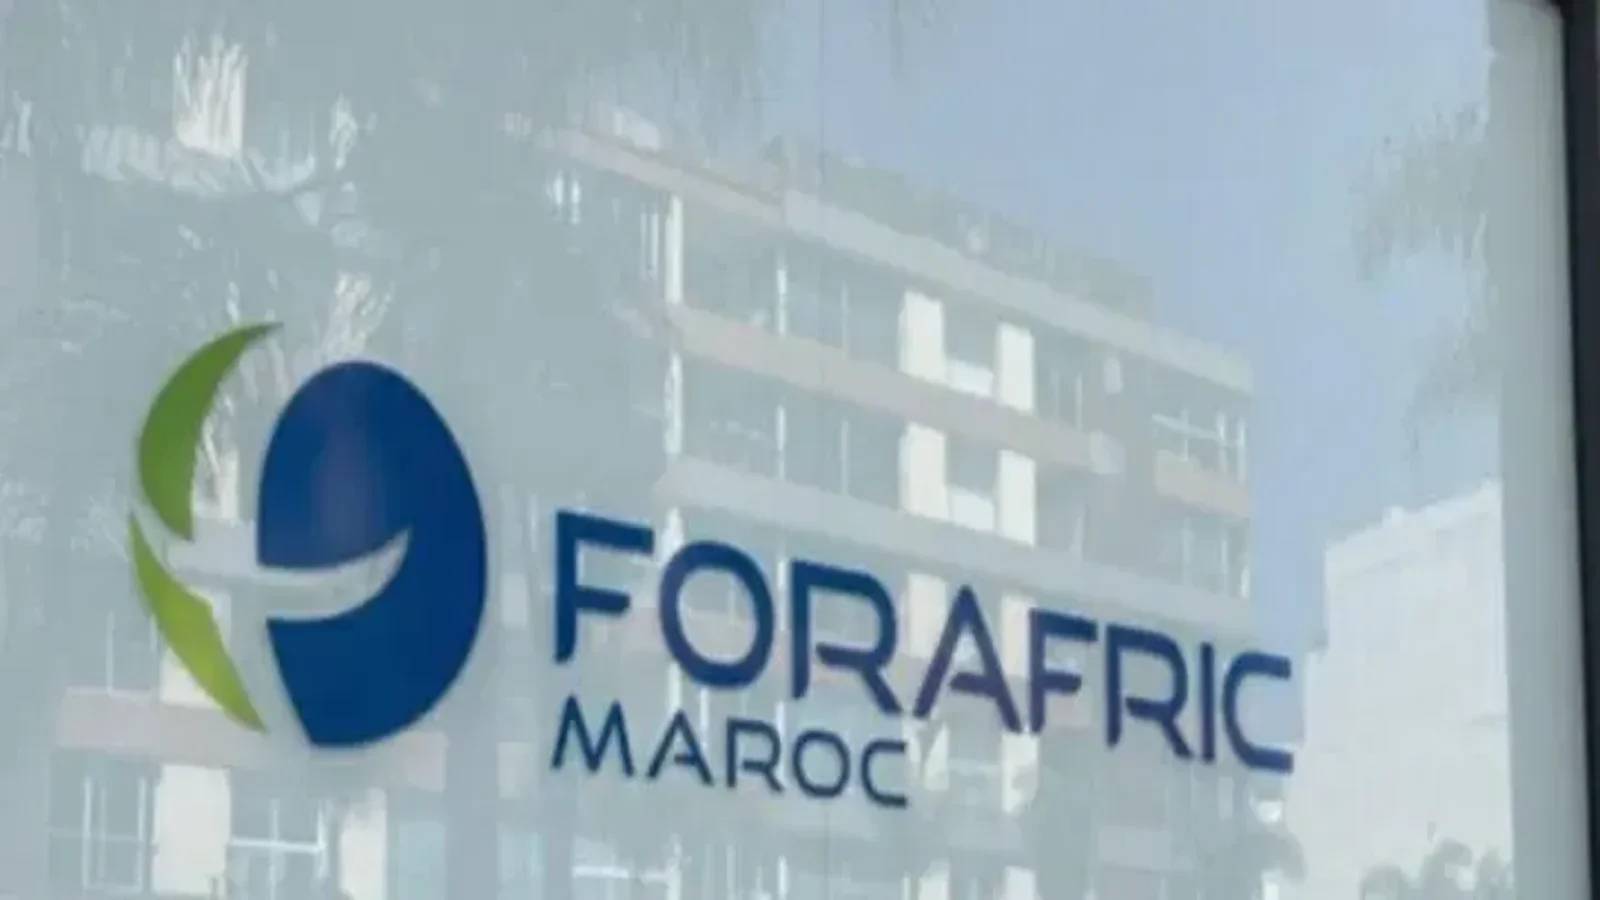 Moroccan wheat milling giant Foreafric plans to acquire majority stake in Société Industrielle de Minoterie du Sud (SIMS)